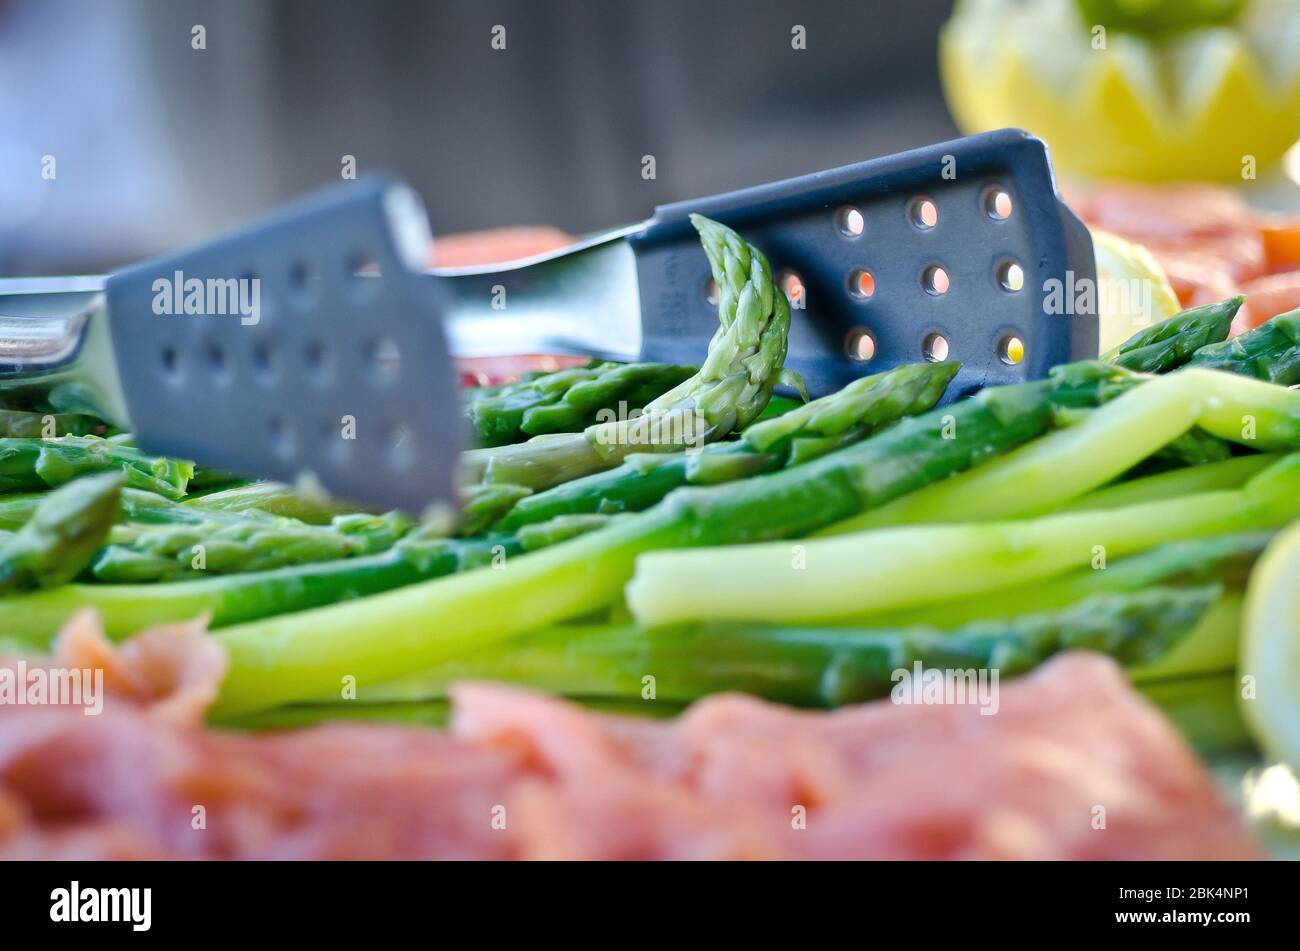 Cooked asparagus beautifully presented on a tray Stock Photo